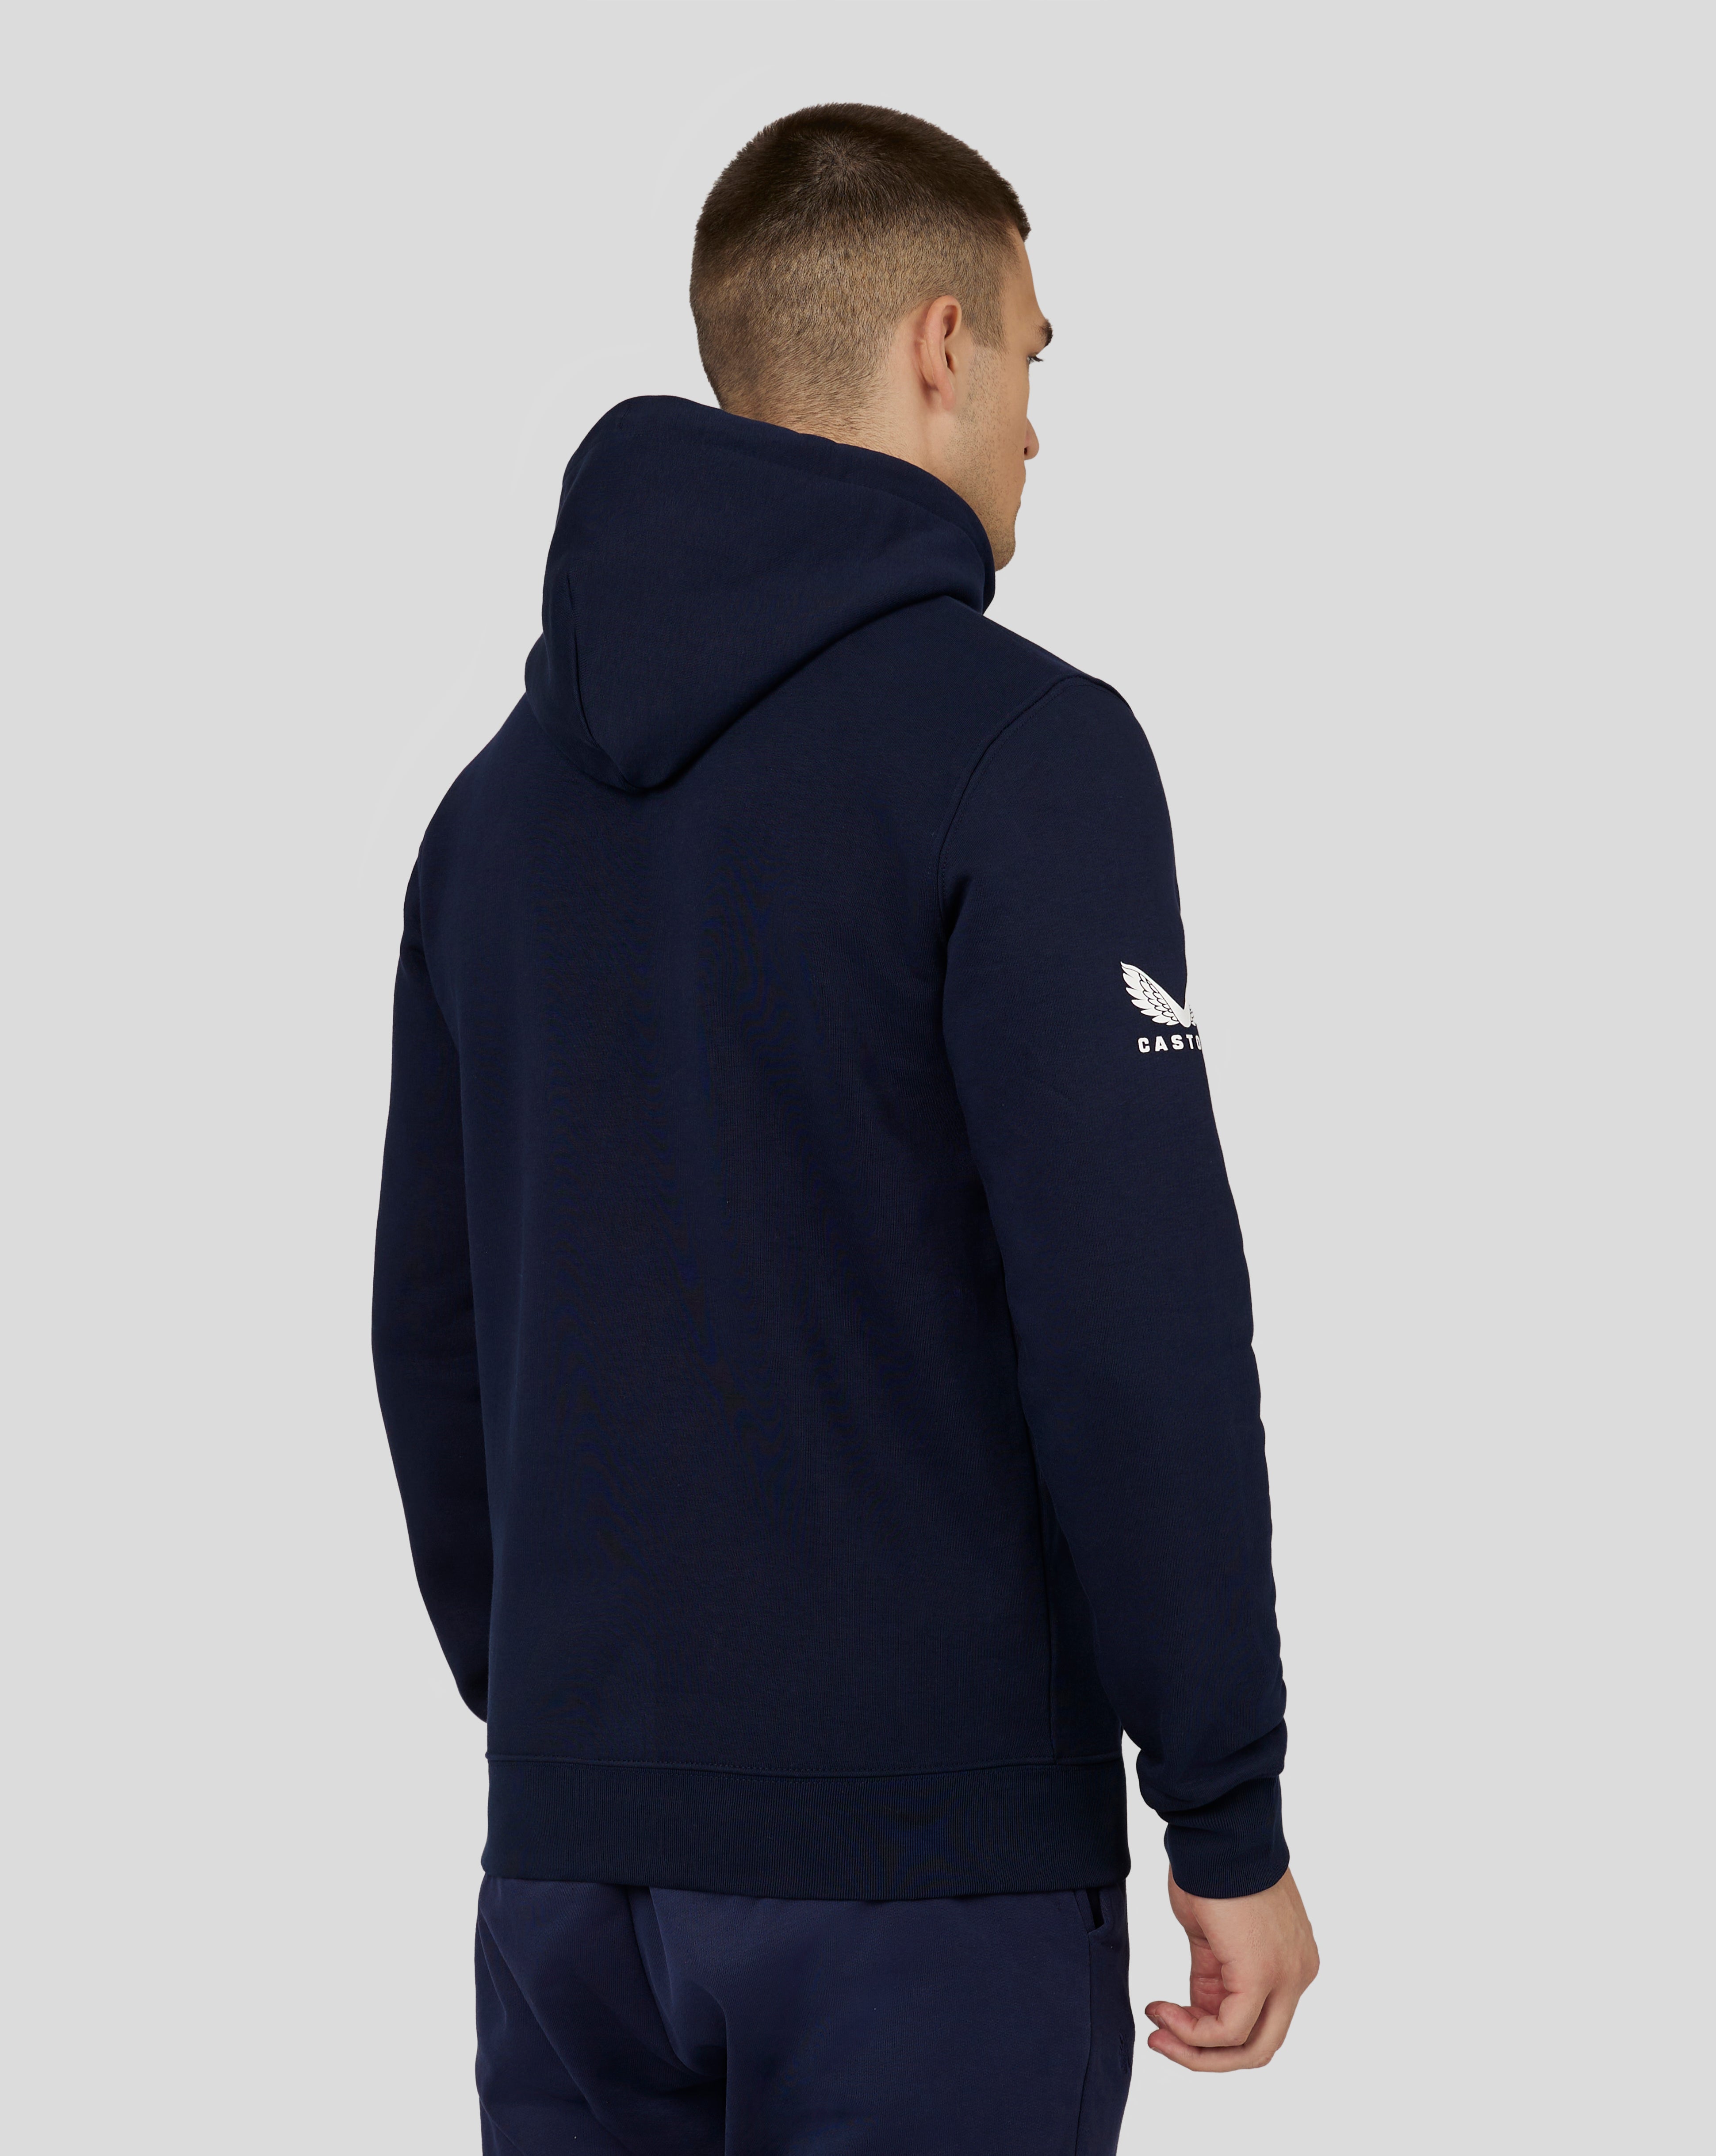 Silverstone X Castore Lifestyle Over Head Hoodie